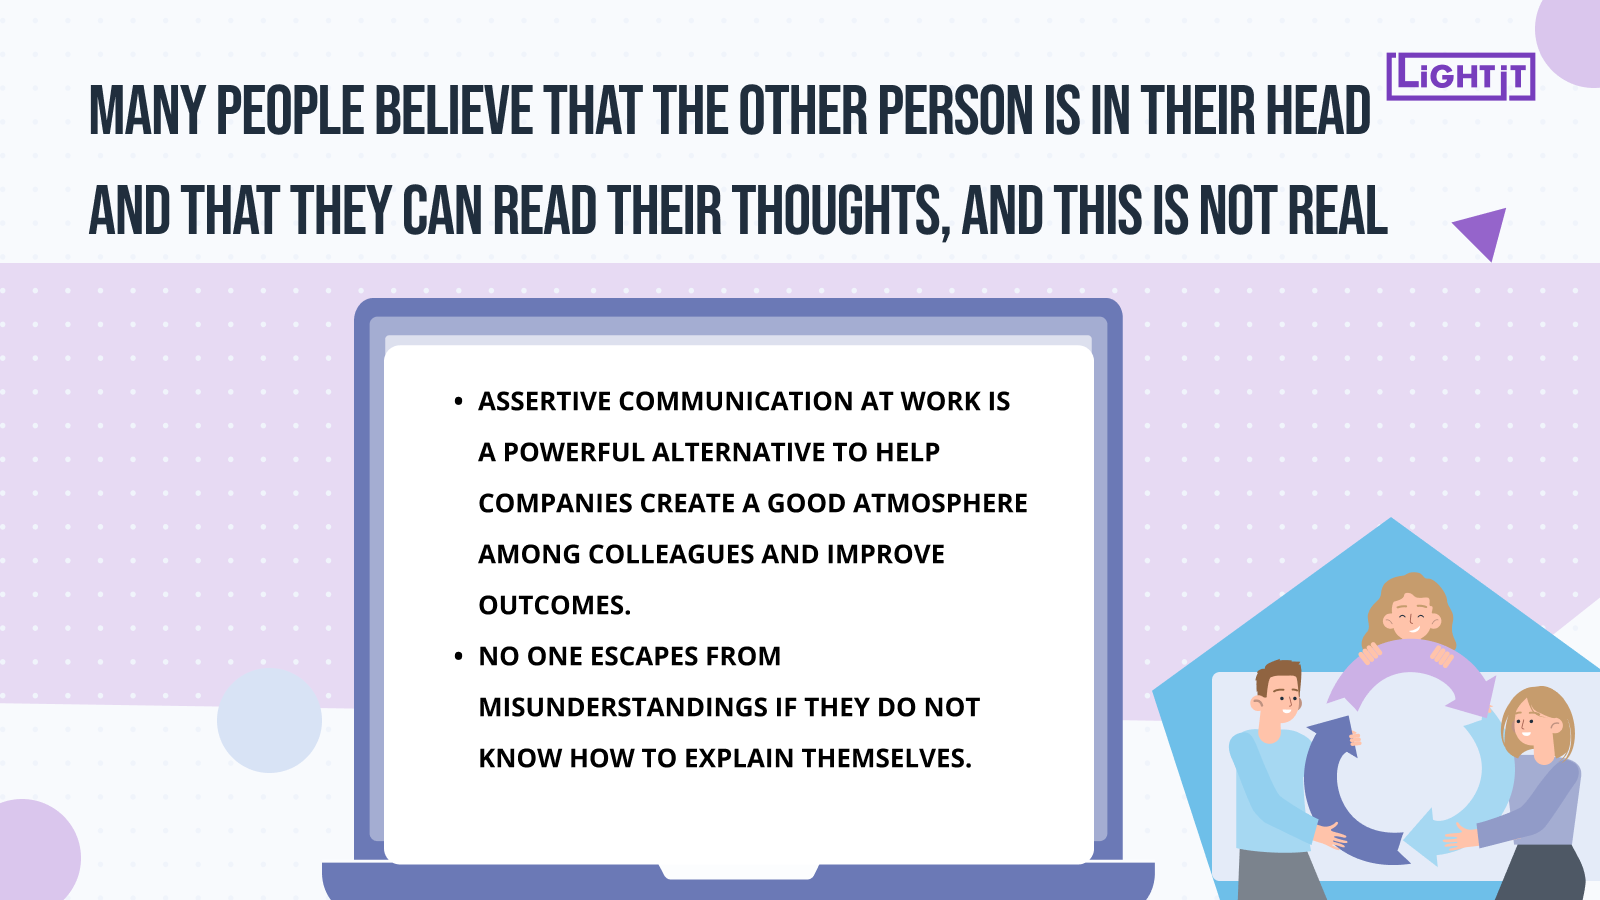 Graphic design in purple and blue colors showing a computer with black text saying: "Many people believe that the other person is in their head and that they can read their thoughts, and this is not real"